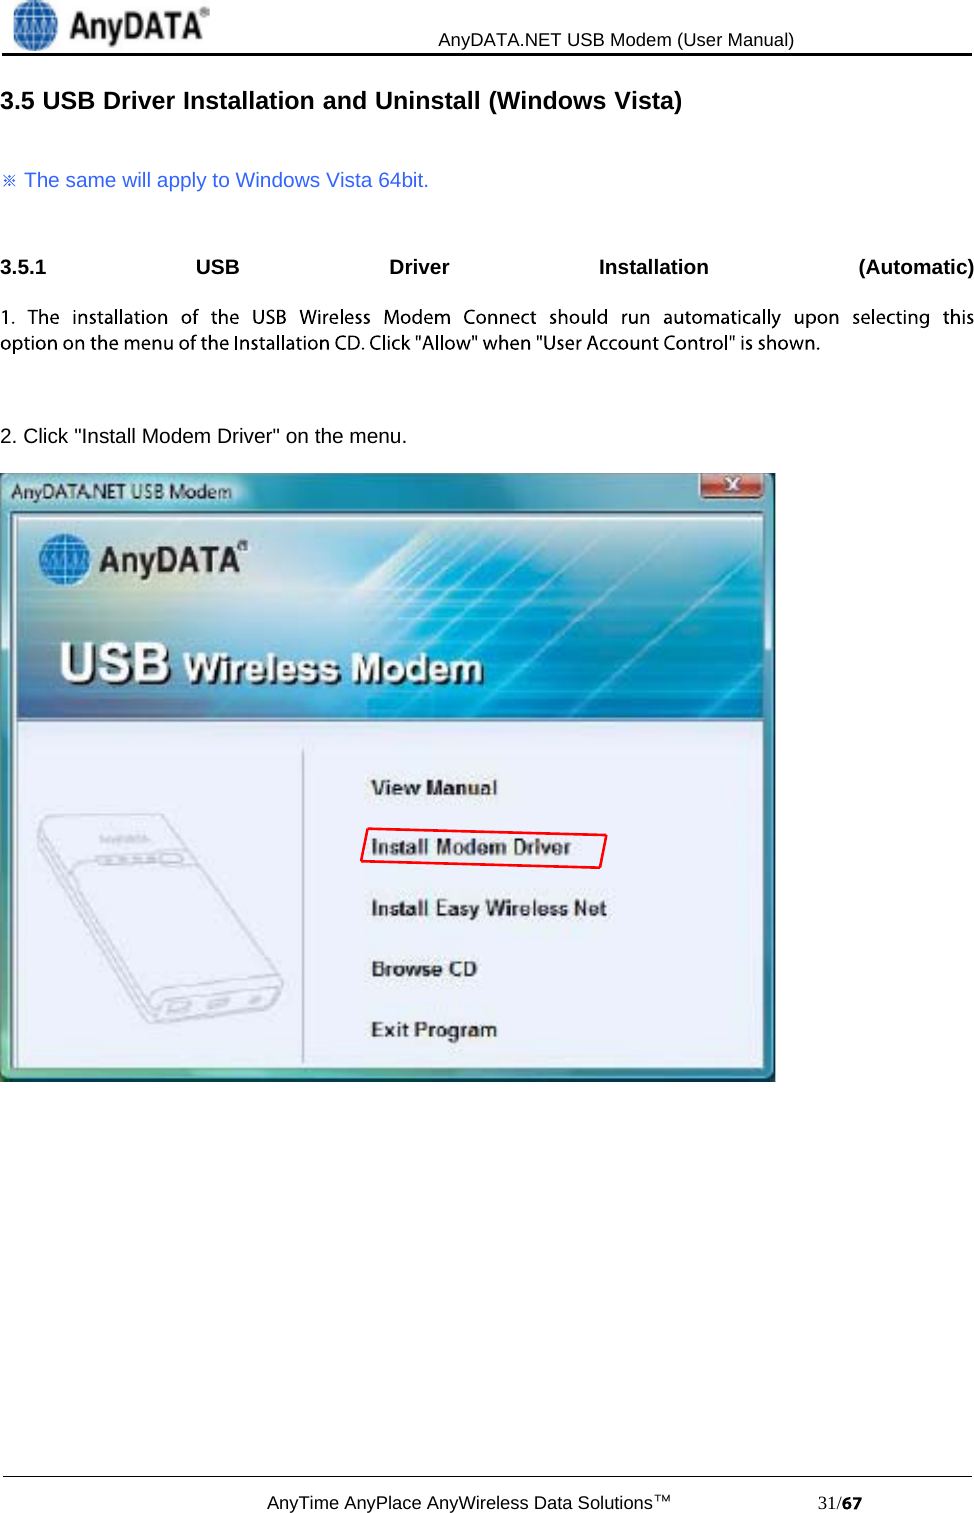                                             AnyDATA.NET USB Modem (User Manual)AnyTime AnyPlace AnyWireless Data Solutions™                            31/3.5 USB Driver Installation and Uninstall (Windows Vista)The same will apply to Windows Vista 64bit.3.5.1 USB Driver Installation (Automatic)2. Click &quot;Install Modem Driver&quot; on the menu.